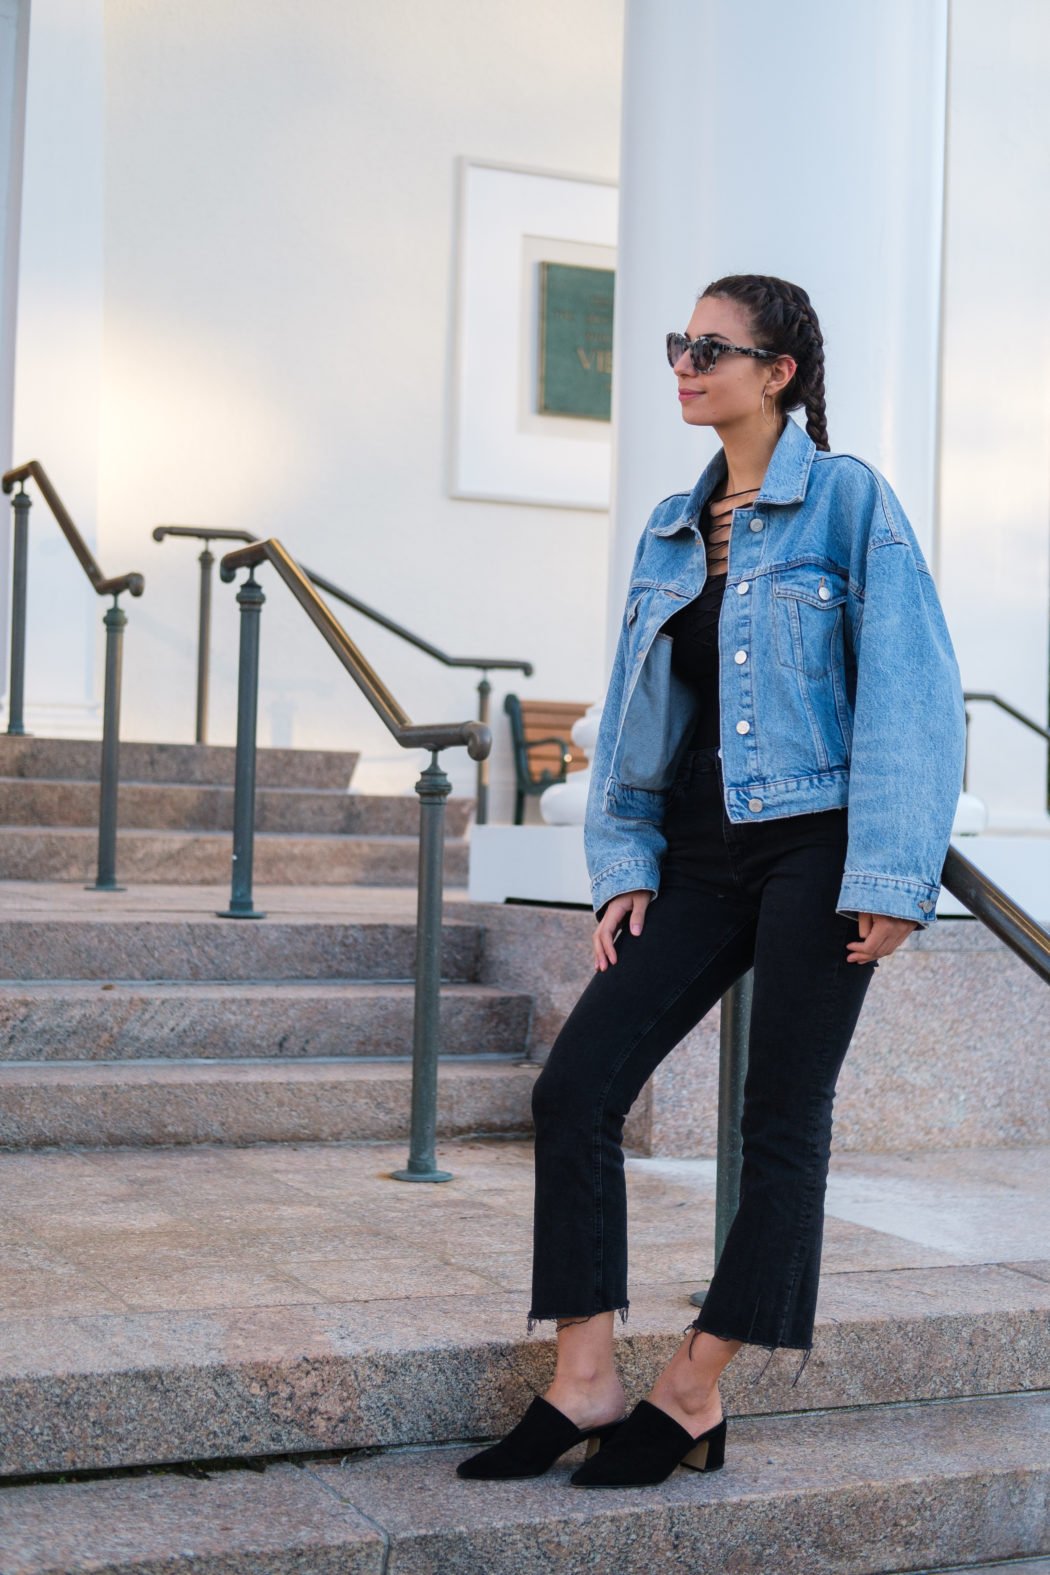 Style Guide: The Oversized Denim Jacket – In a City Night